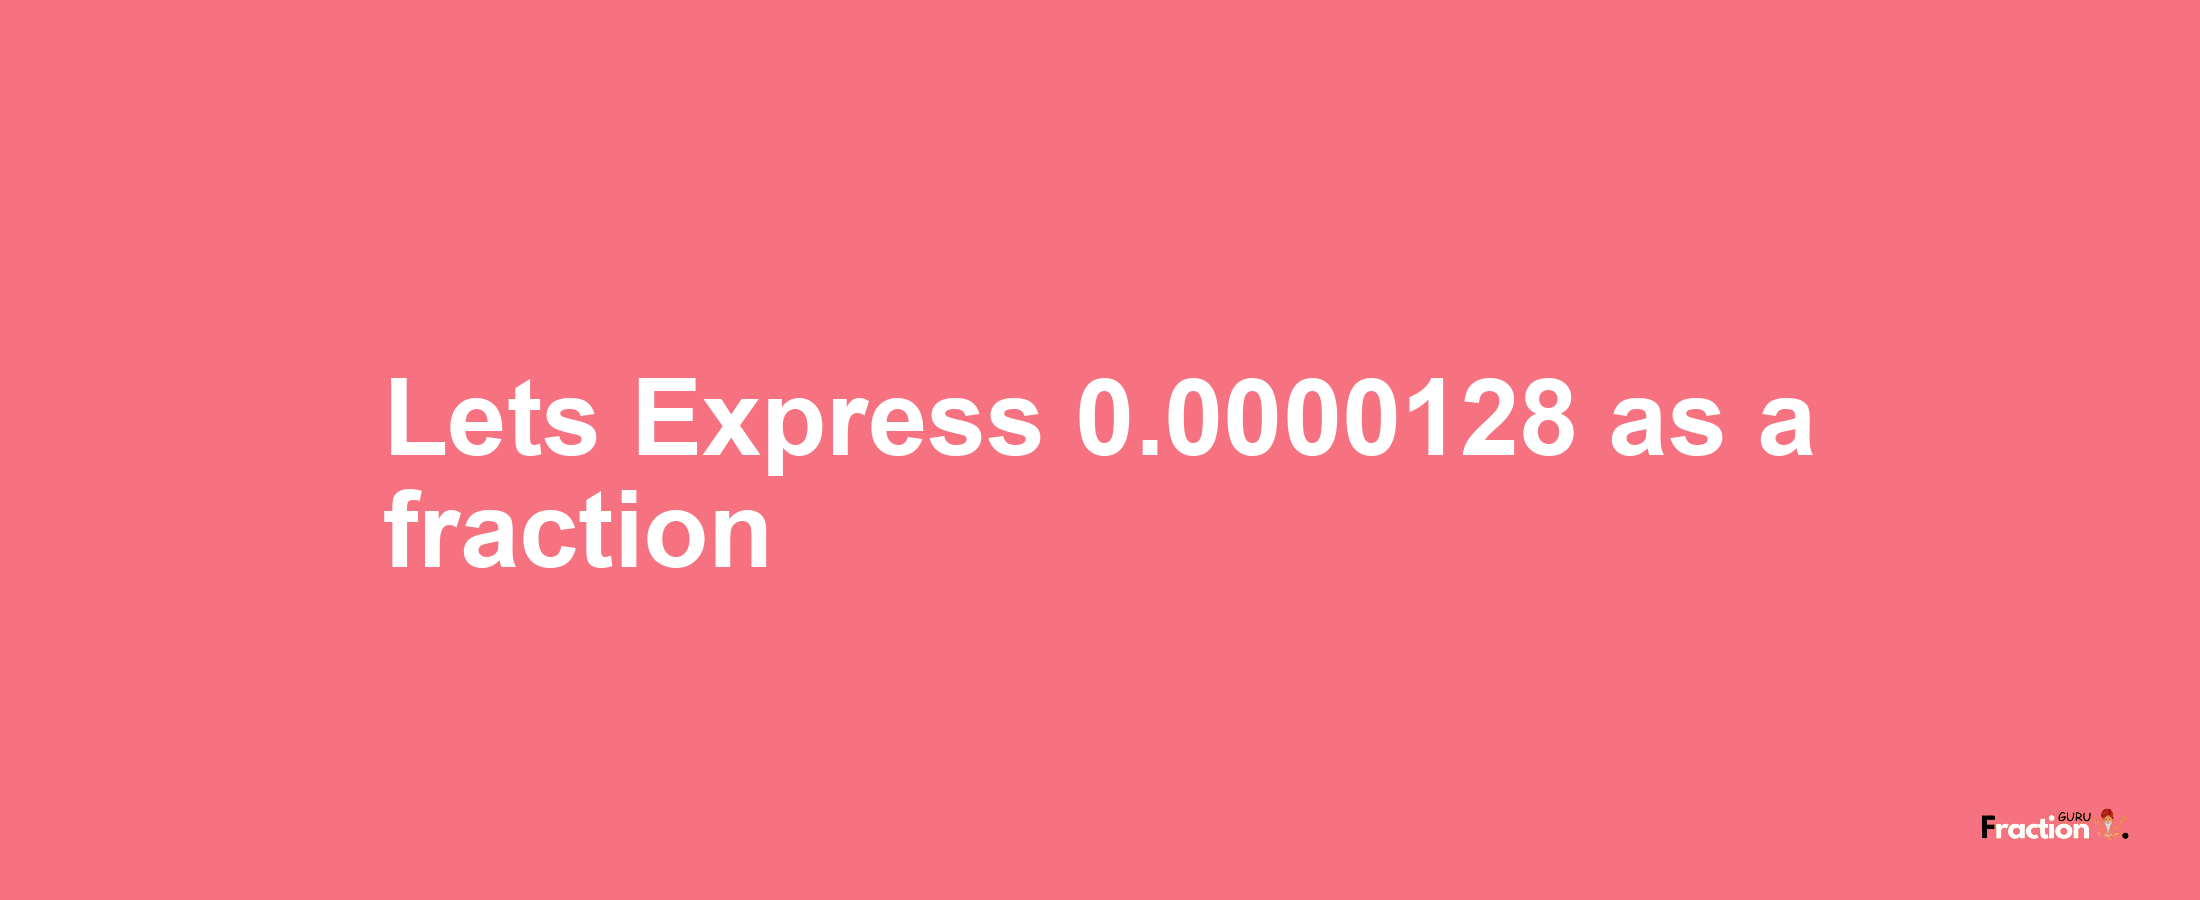 Lets Express 0.0000128 as afraction